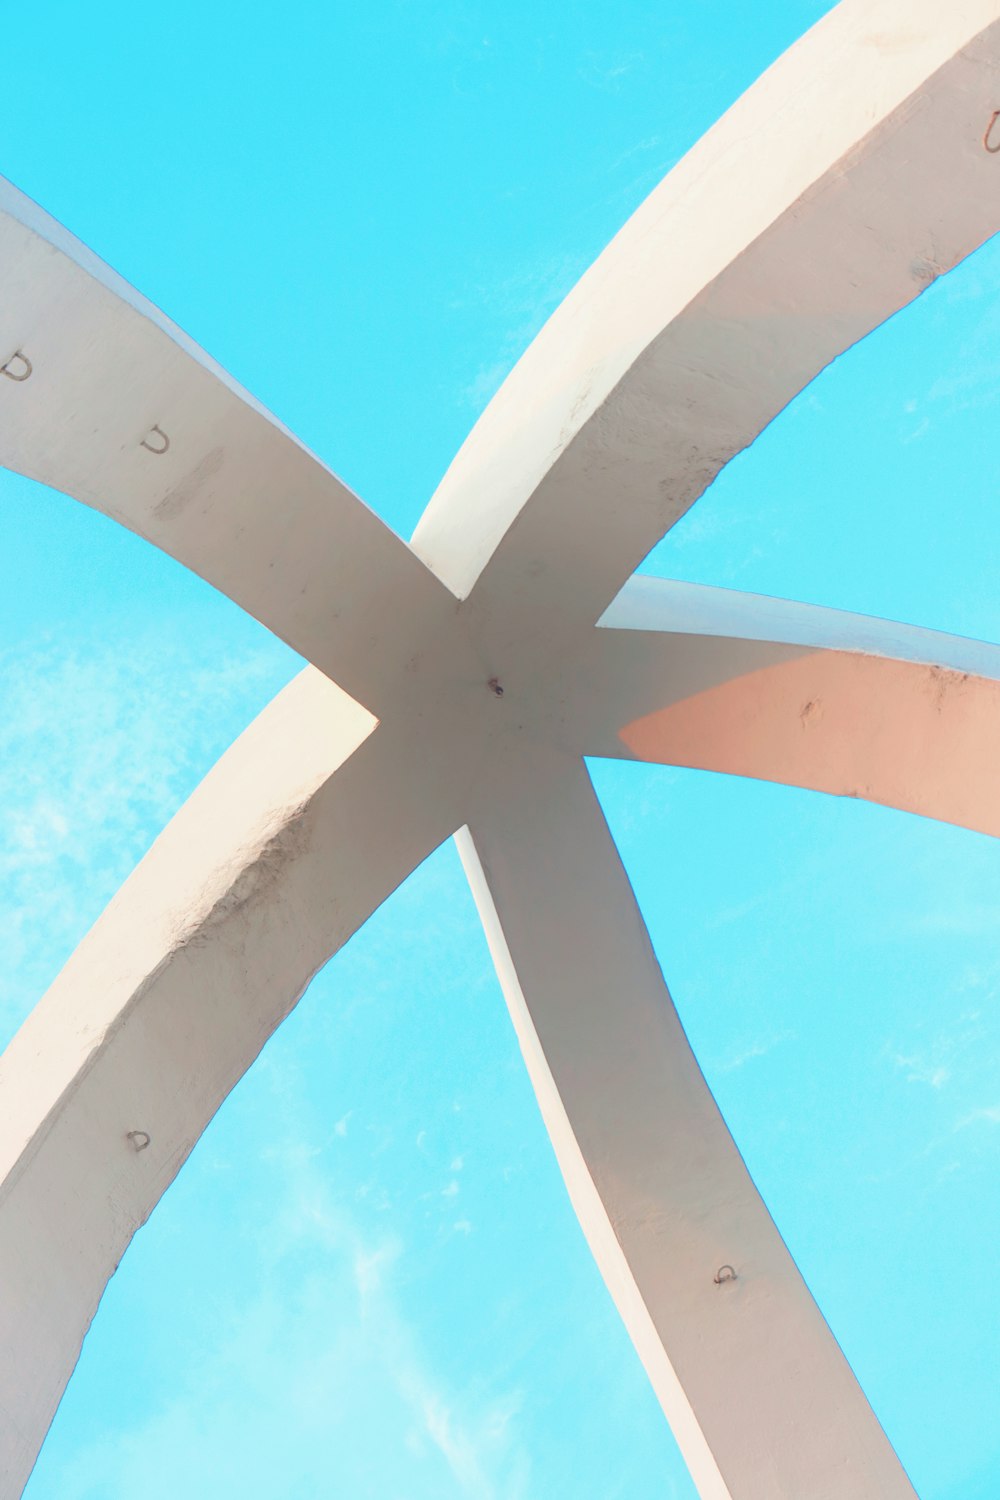 the underside of a white sculpture against a blue sky